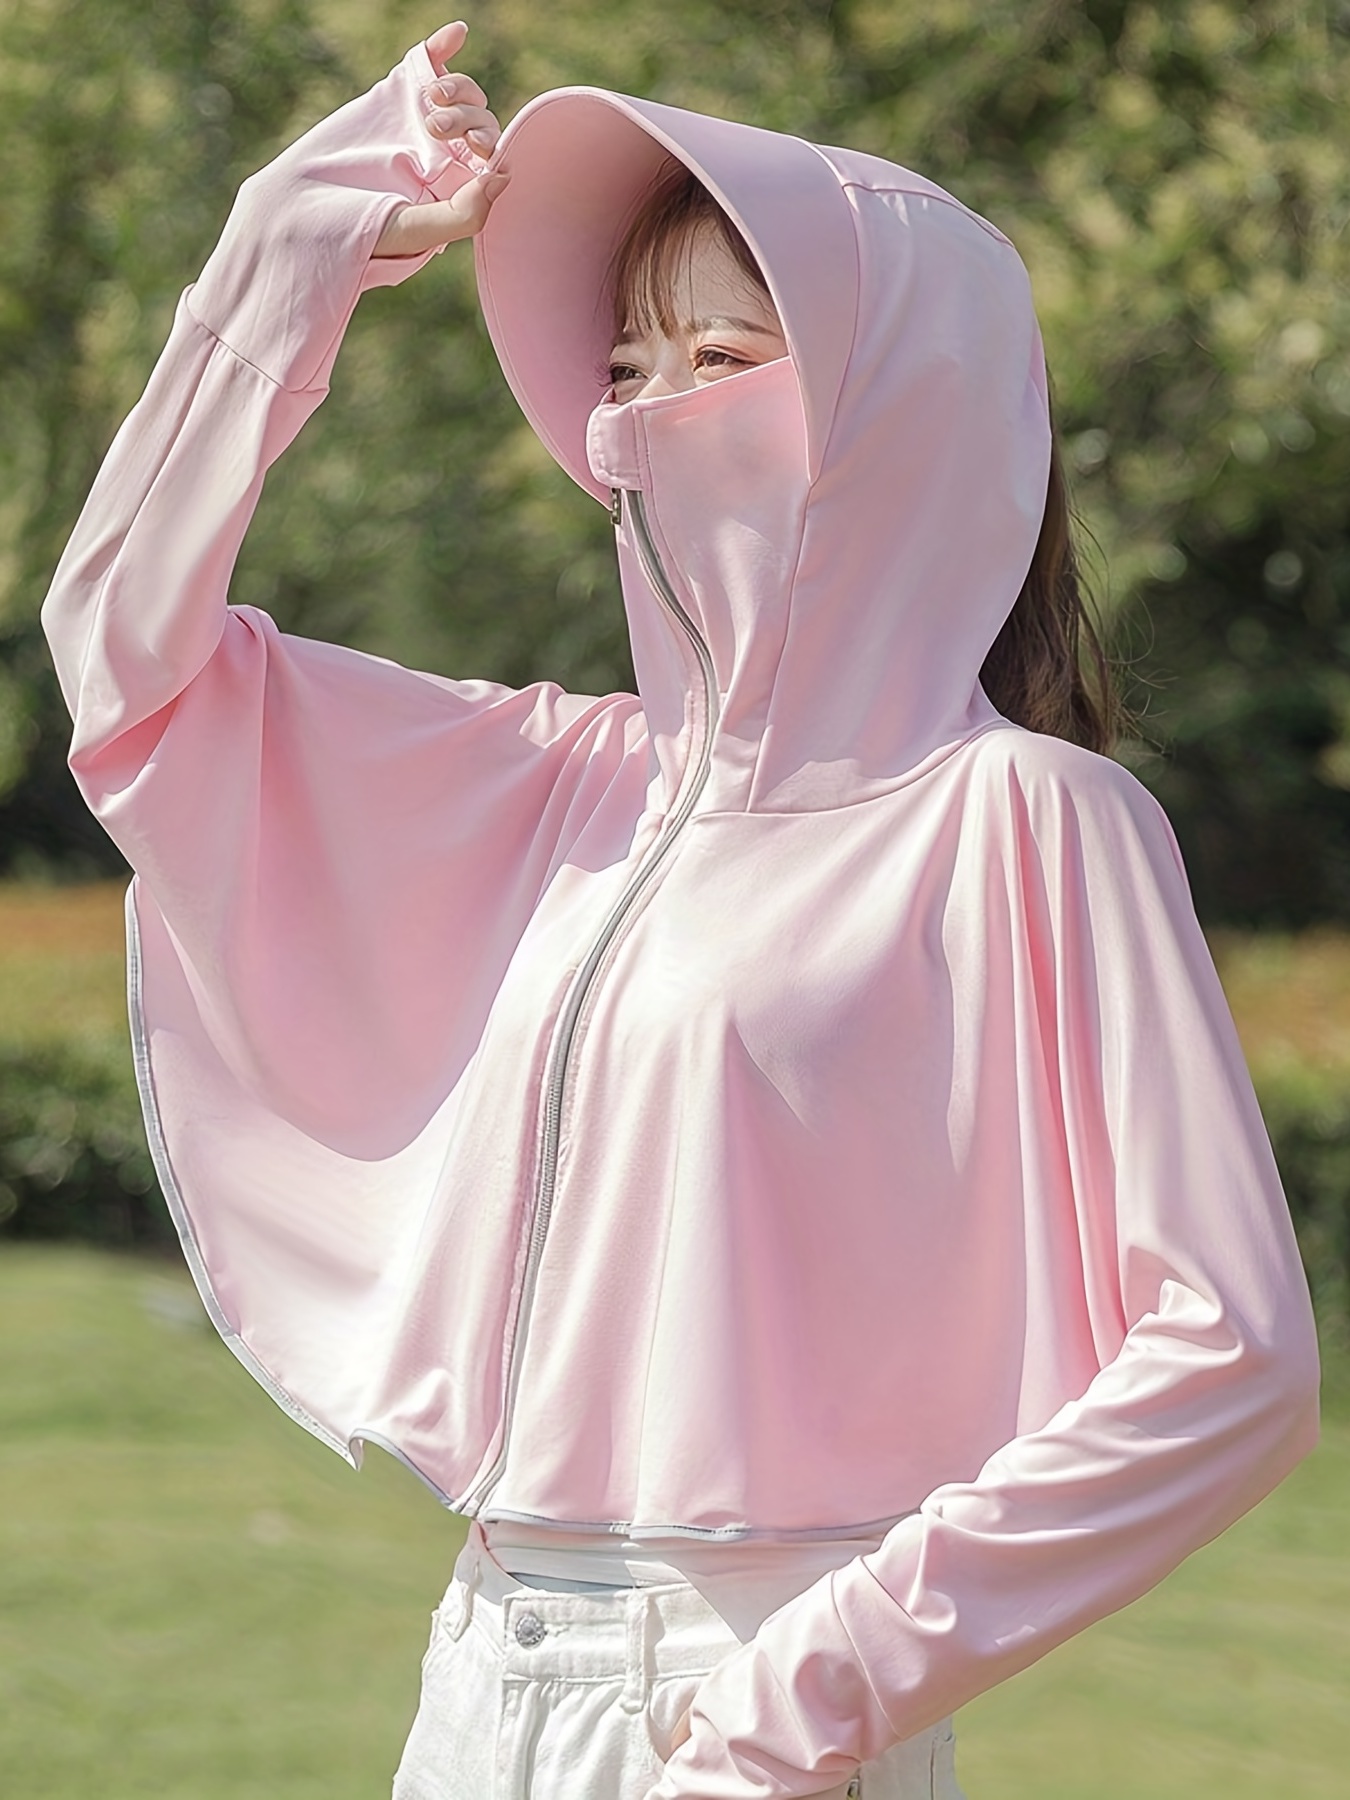 New hooded sun protection clothing fashion trend summer UV